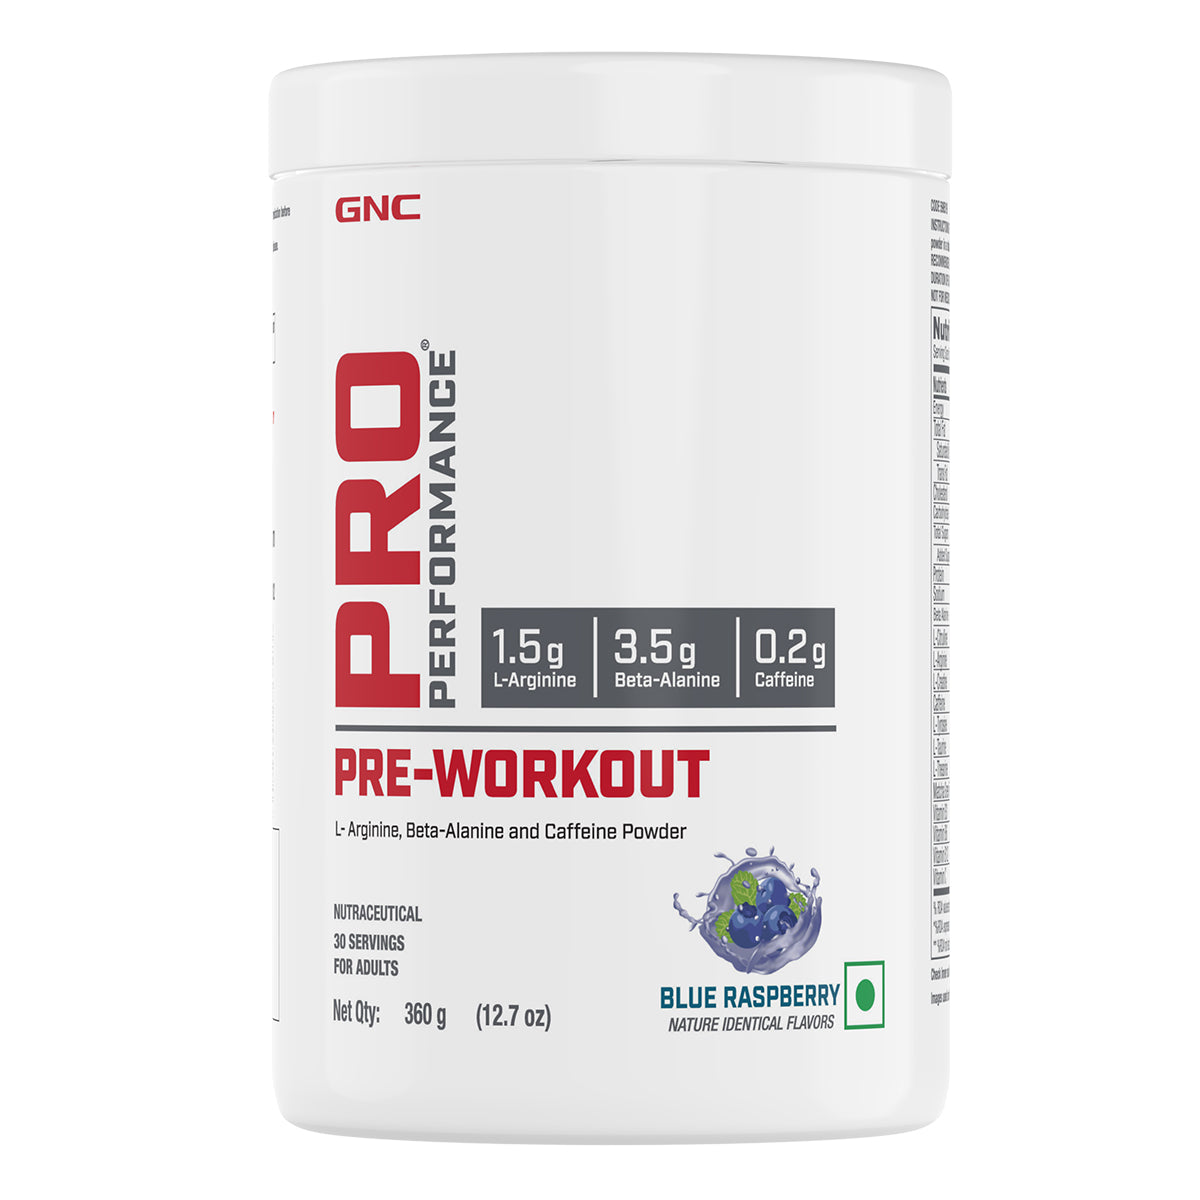 Complete Workout Stack For Beginners - Faster Recovery & Lean Muscle Gains | Improves Energy & Focus |Builds & Repairs Muscles